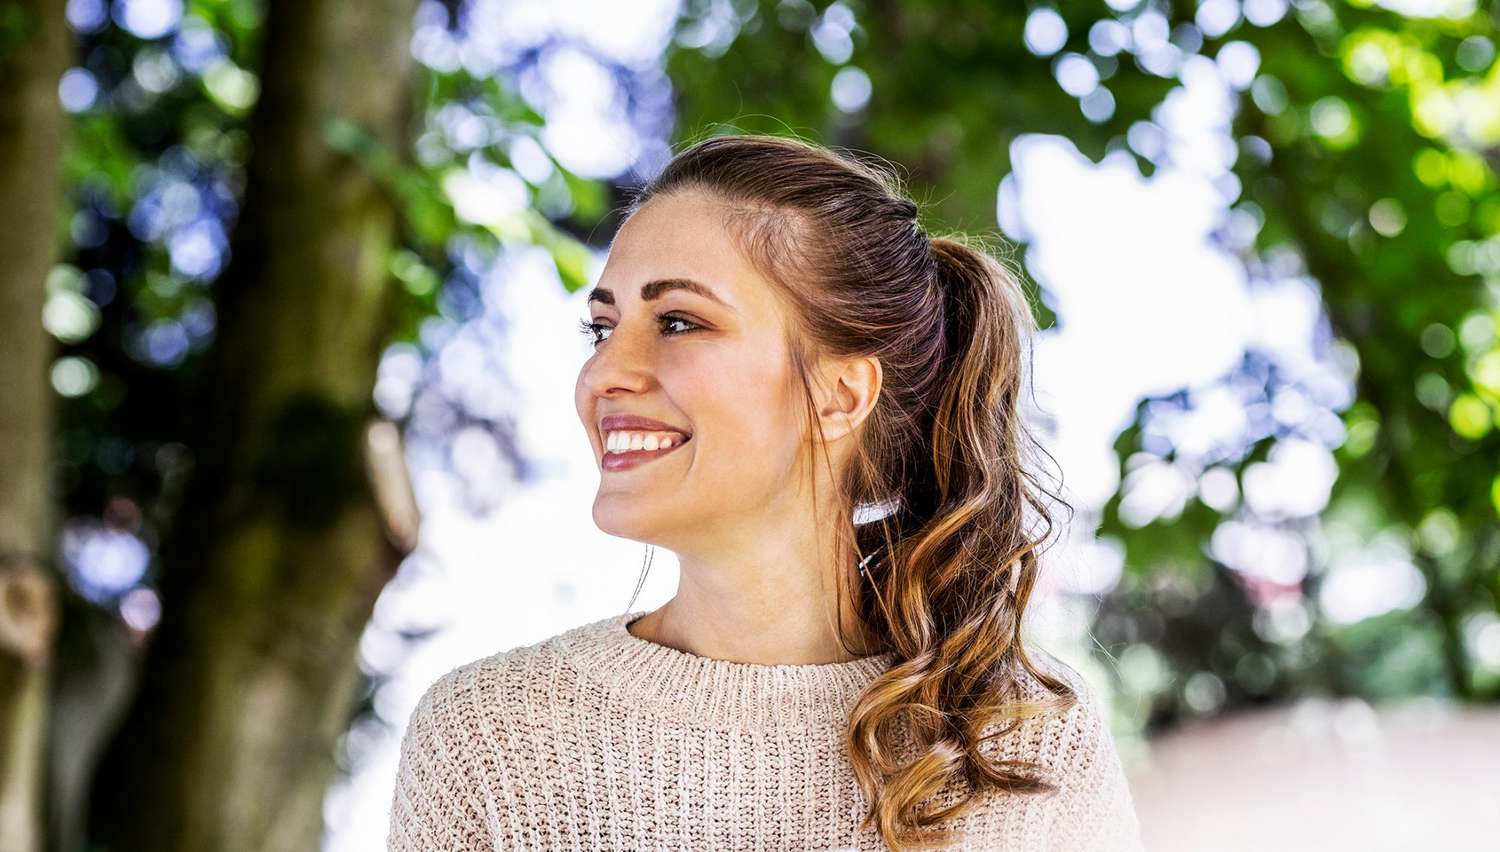 smiling woman in park with a high ponytail